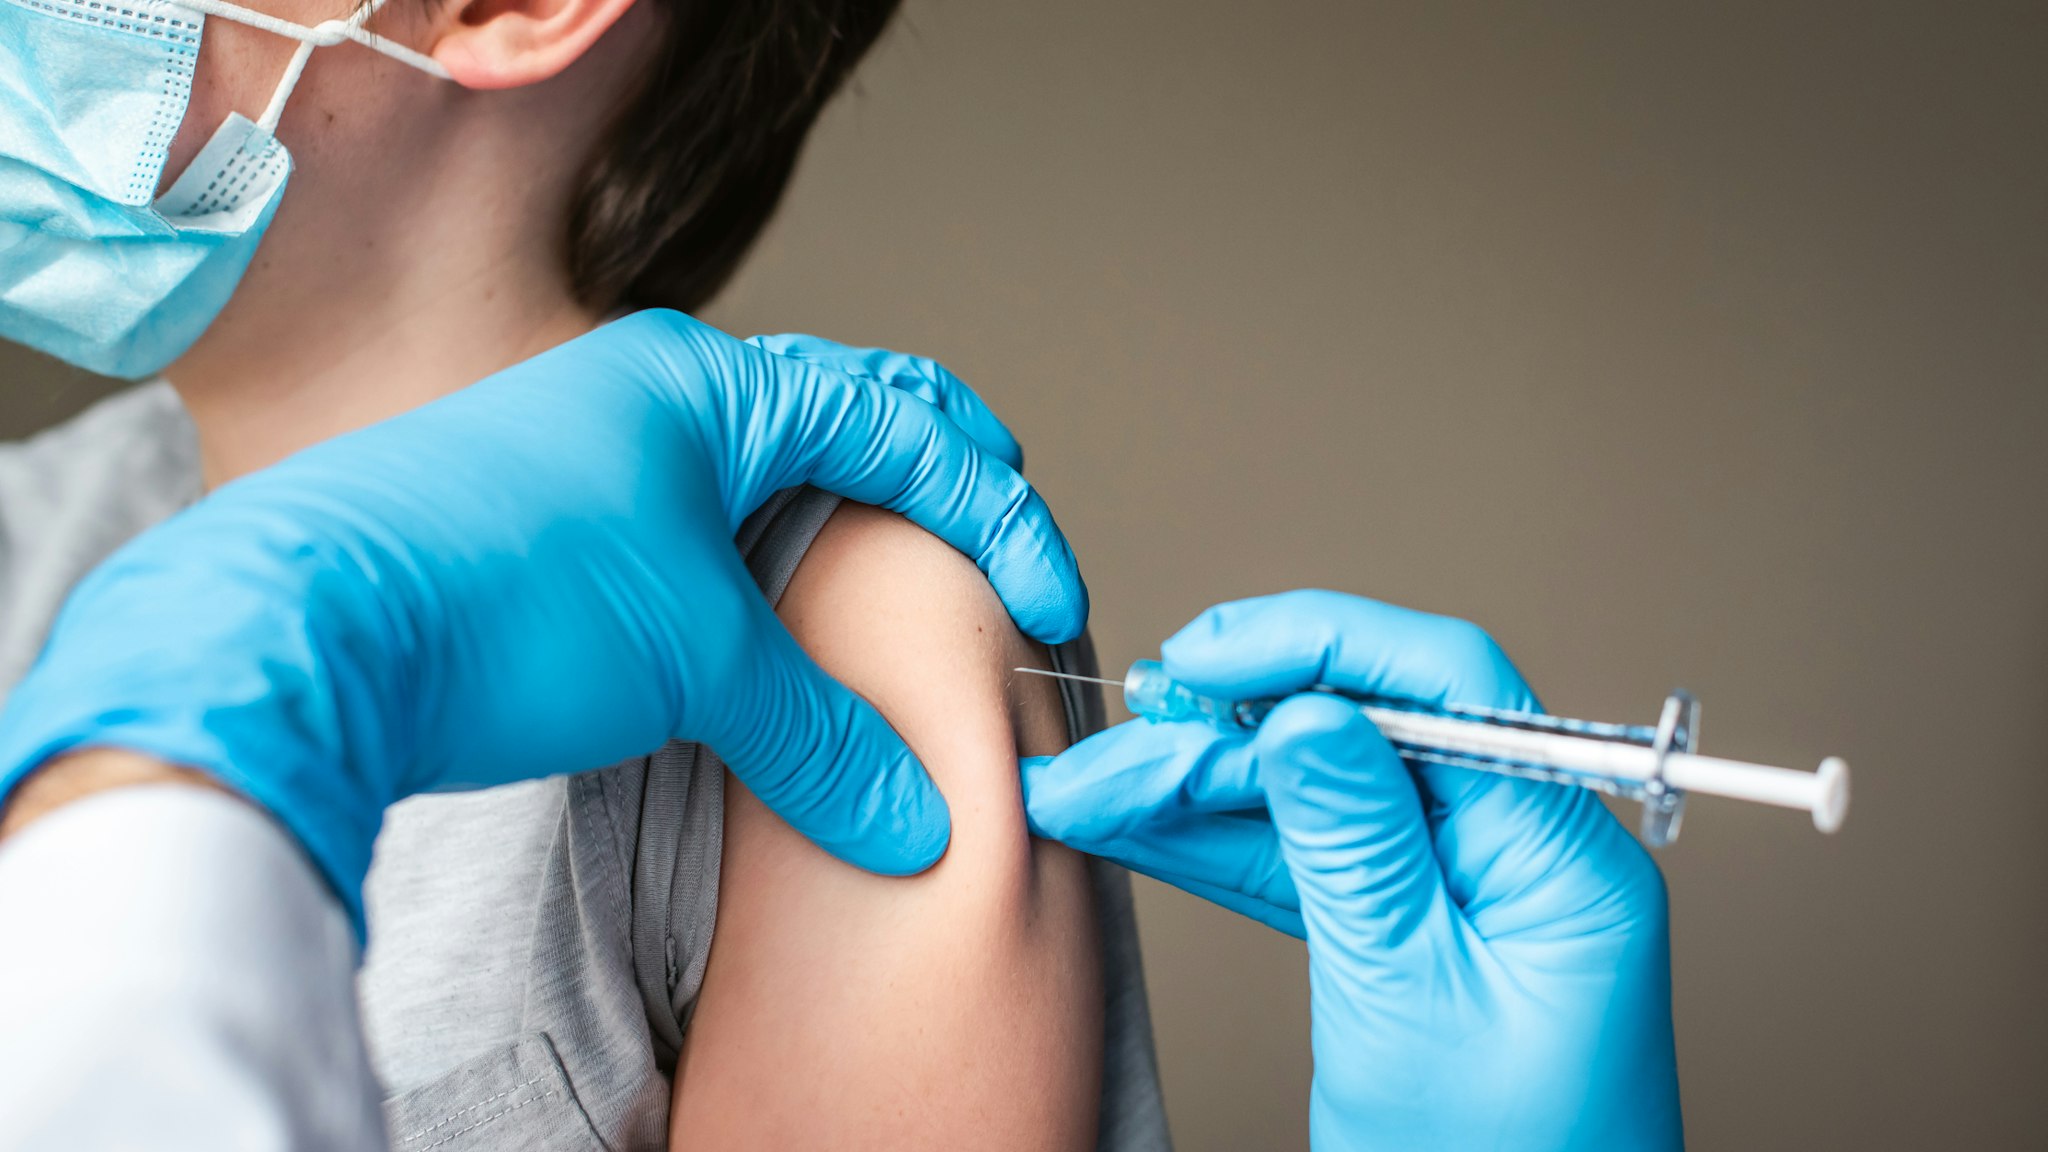 Child wearing mask getting vaccinated by doctor holding a needle. - stock photo